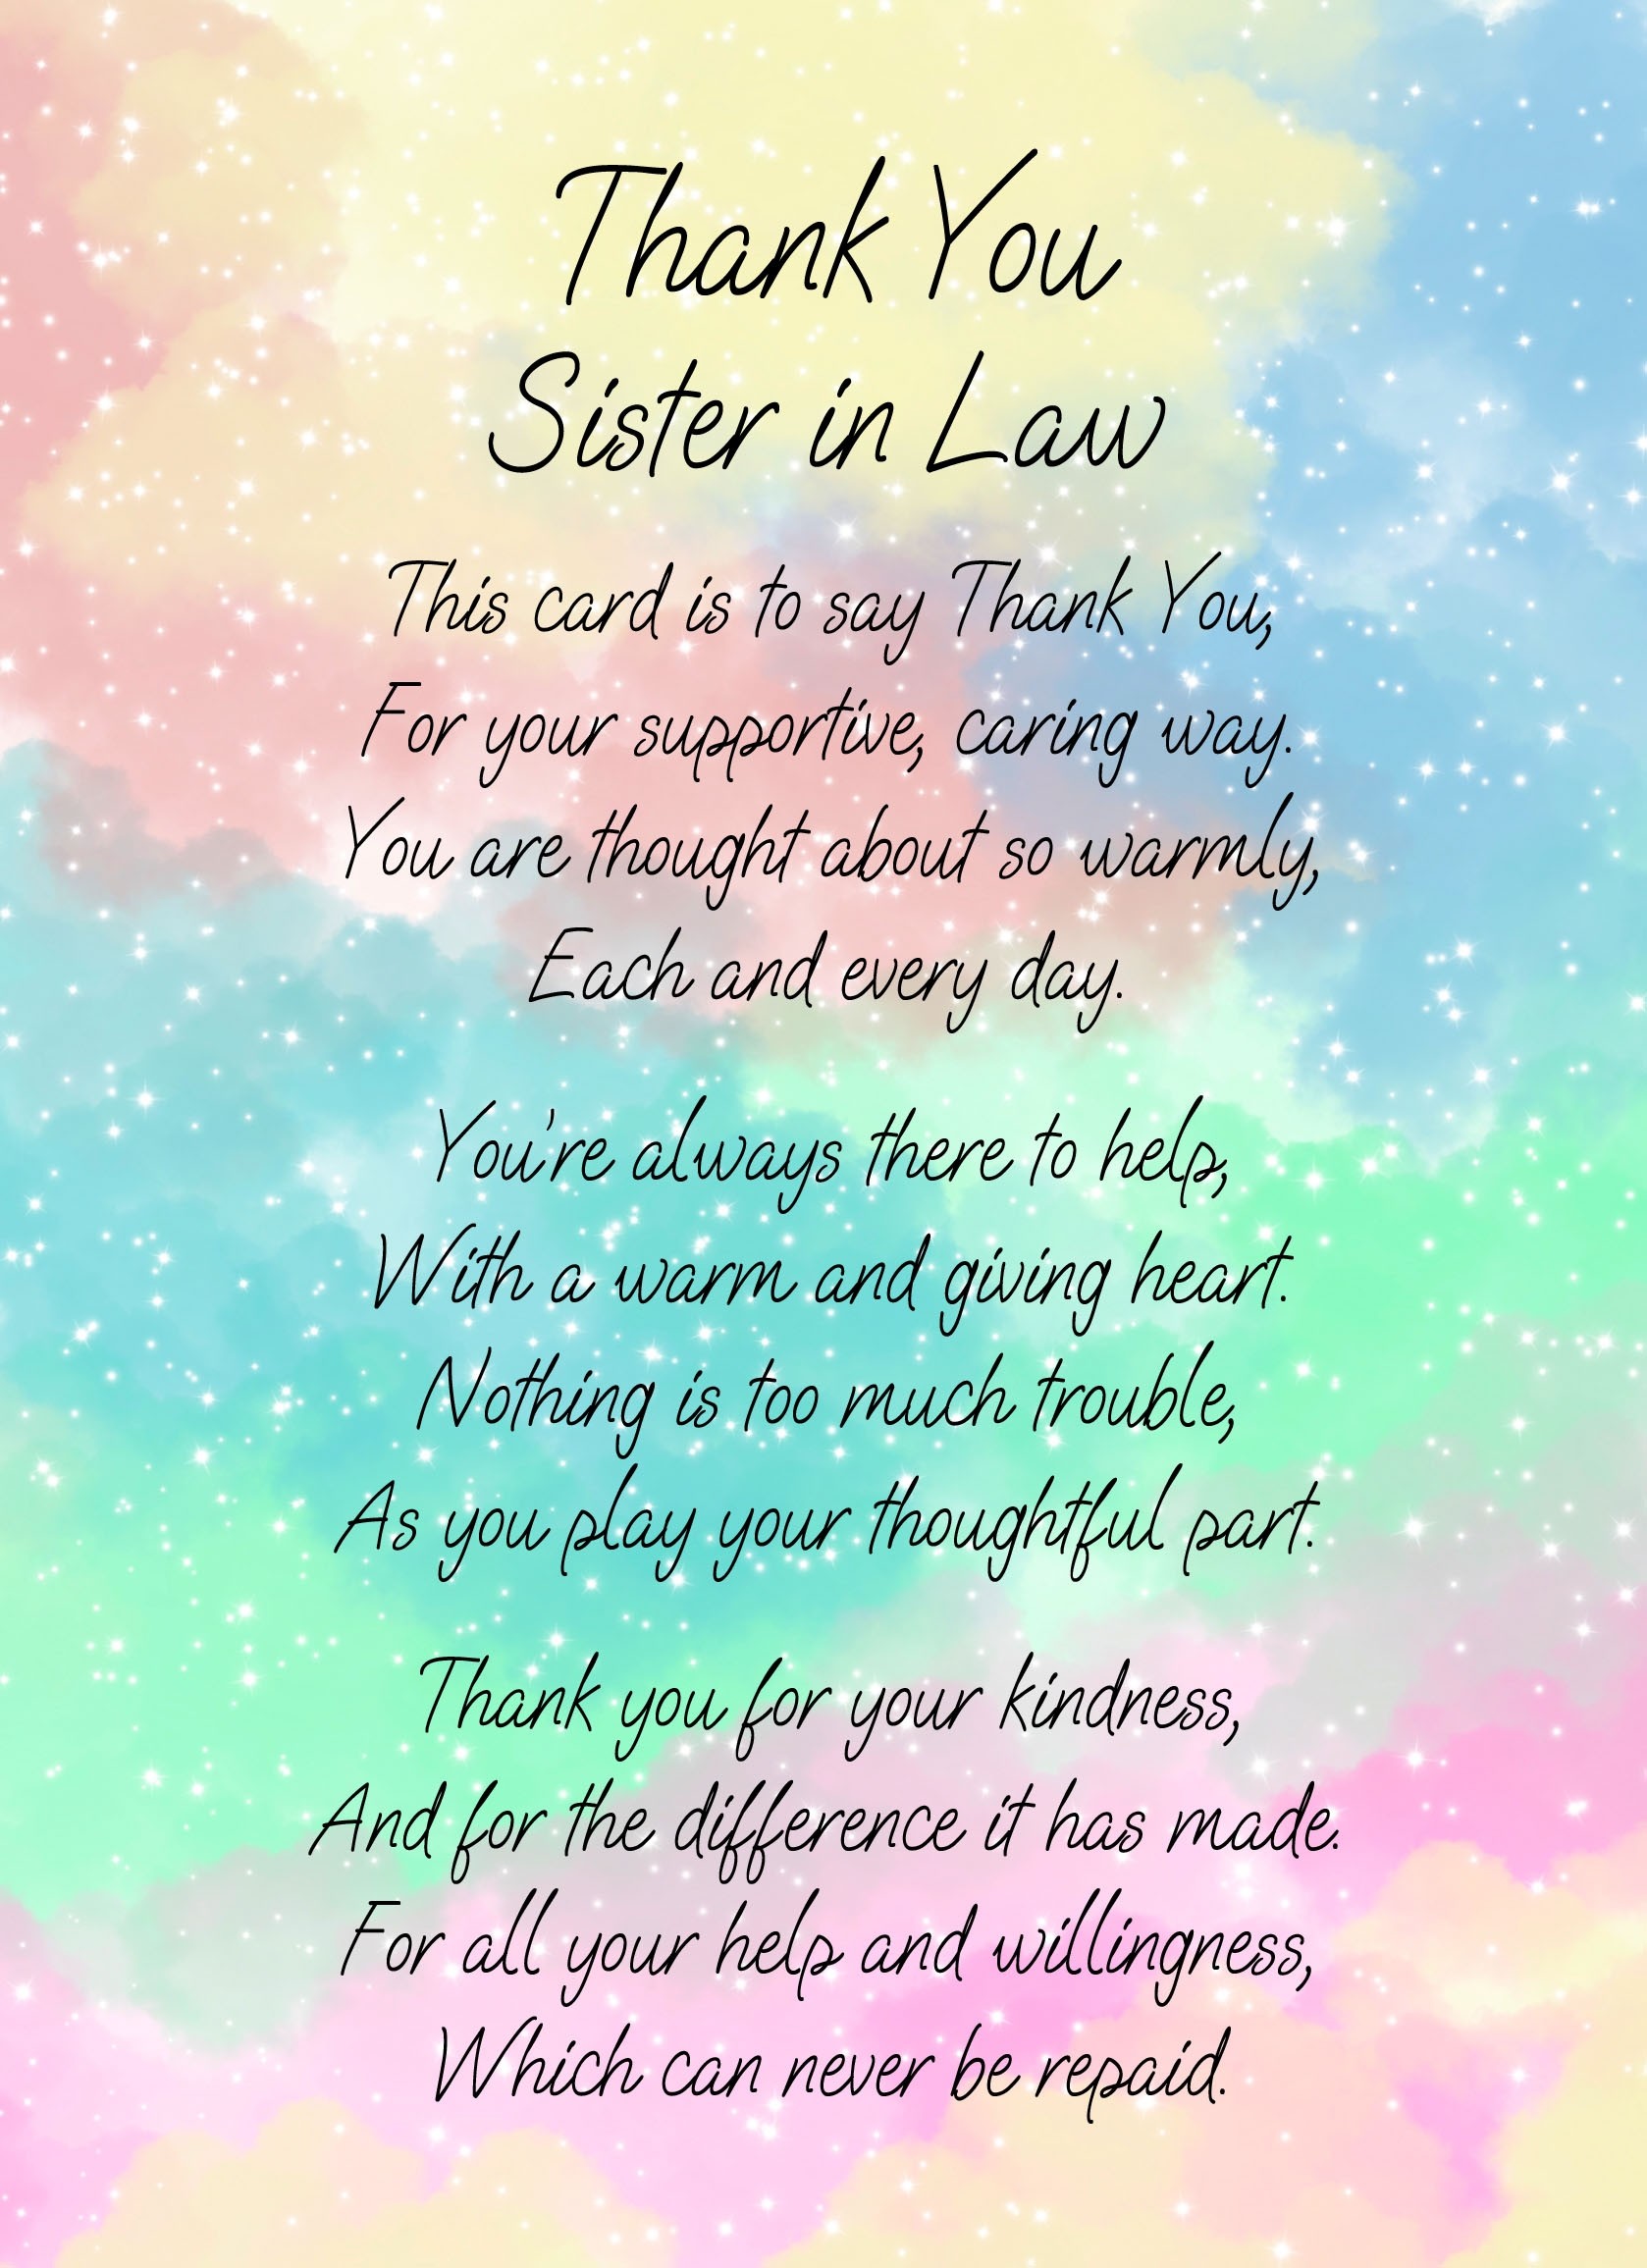 Thank You Poem Verse Card For Sister in Law